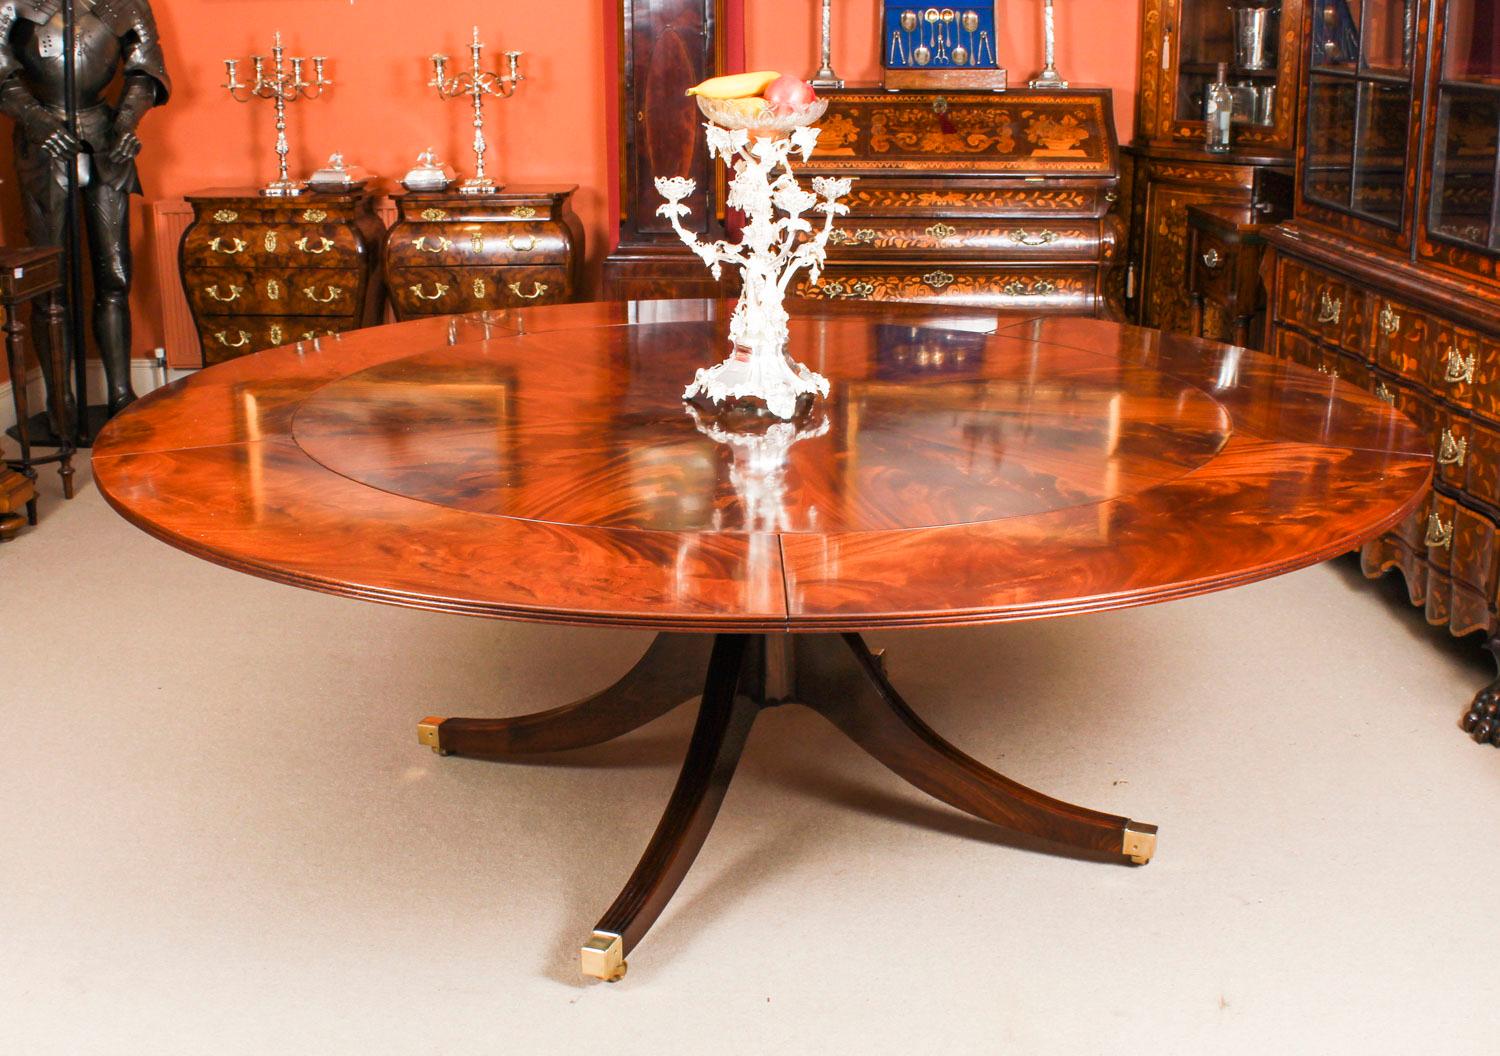 This is a beautiful Regency Revival Jupe style flame mahogany dining table, dating from the mid-20th century.

The table has a solid mahogany top that has five additional perimeter leaves that can be added around the circumference. It is very stable